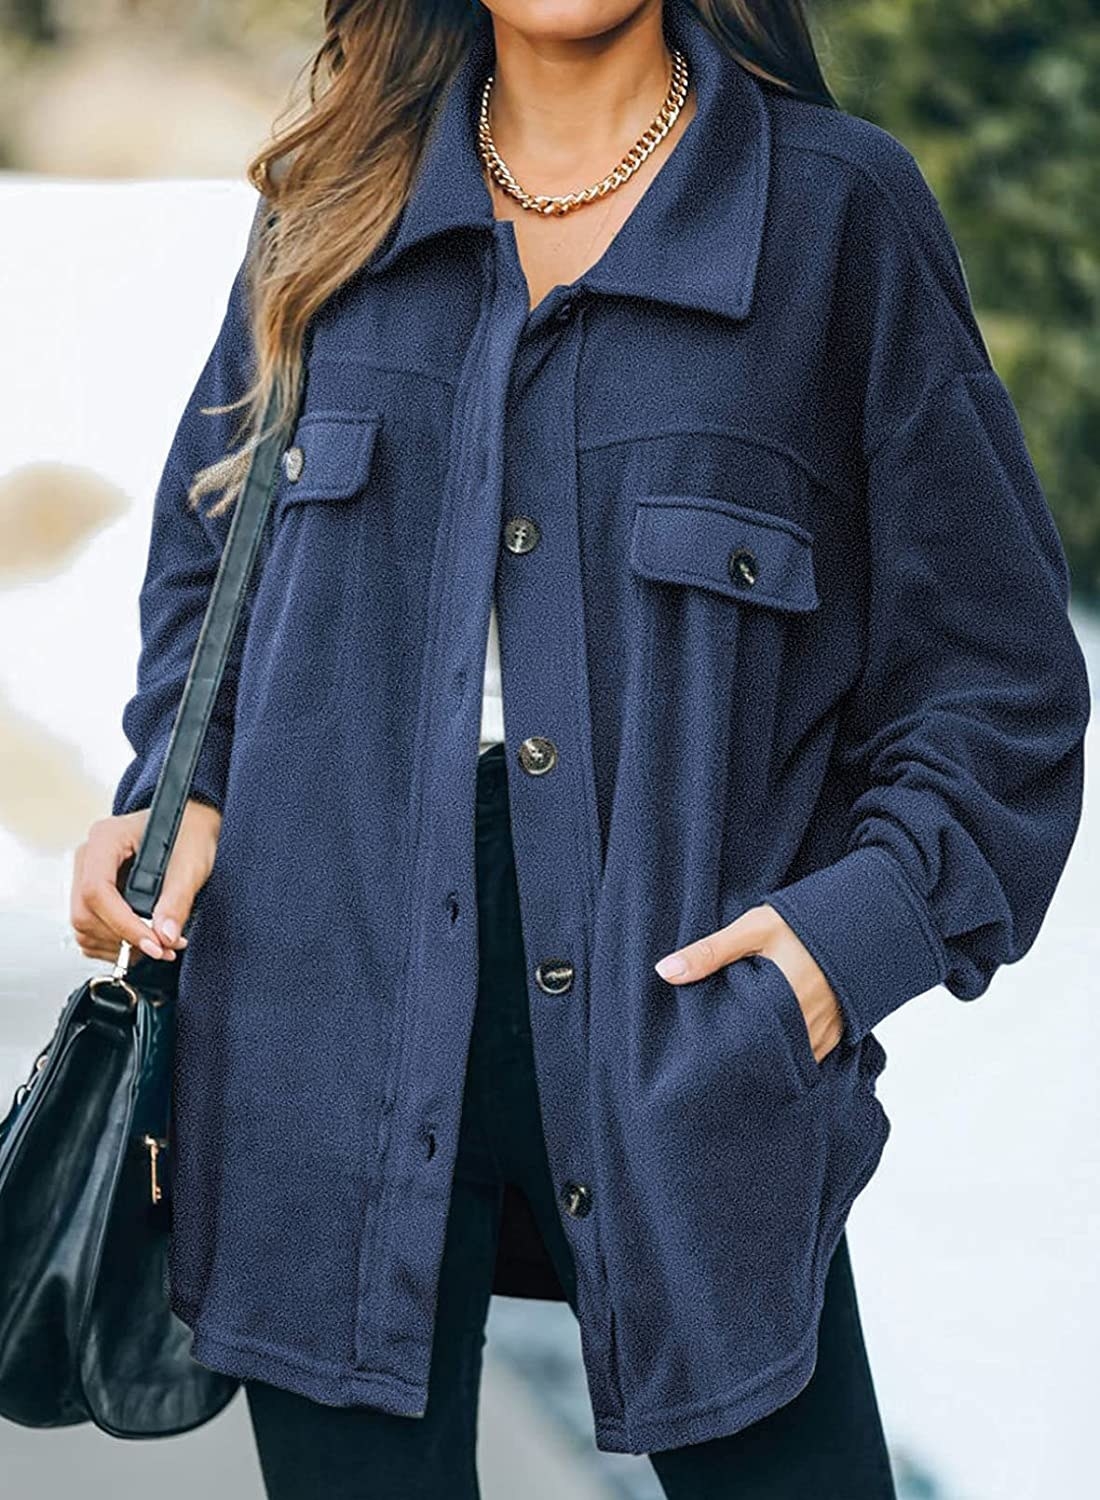 A model wearing the button-down shirt jacket with chest and waist pockets in navy blue